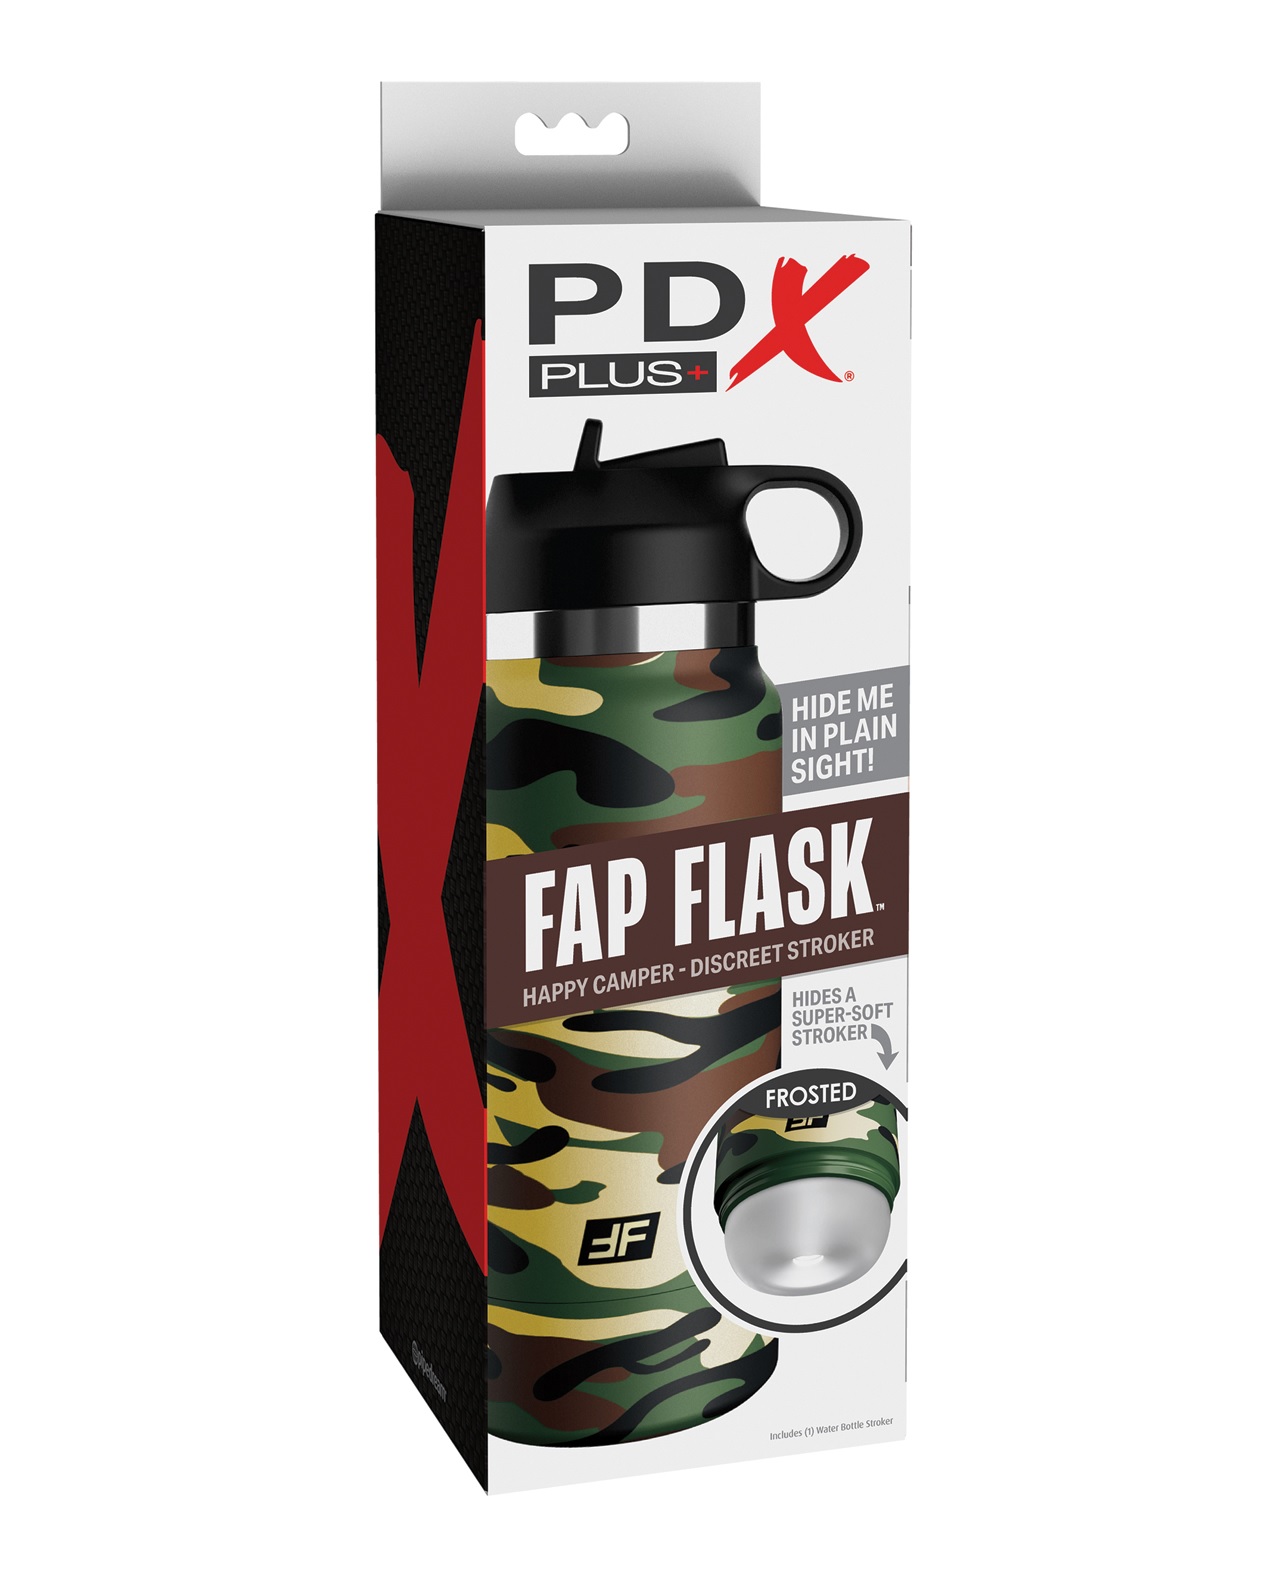 PDX PLUS FAP FLASK HAPPY CAMPER DISCREET STROKER CAMO BOTTLE FROSTED - Click Image to Close